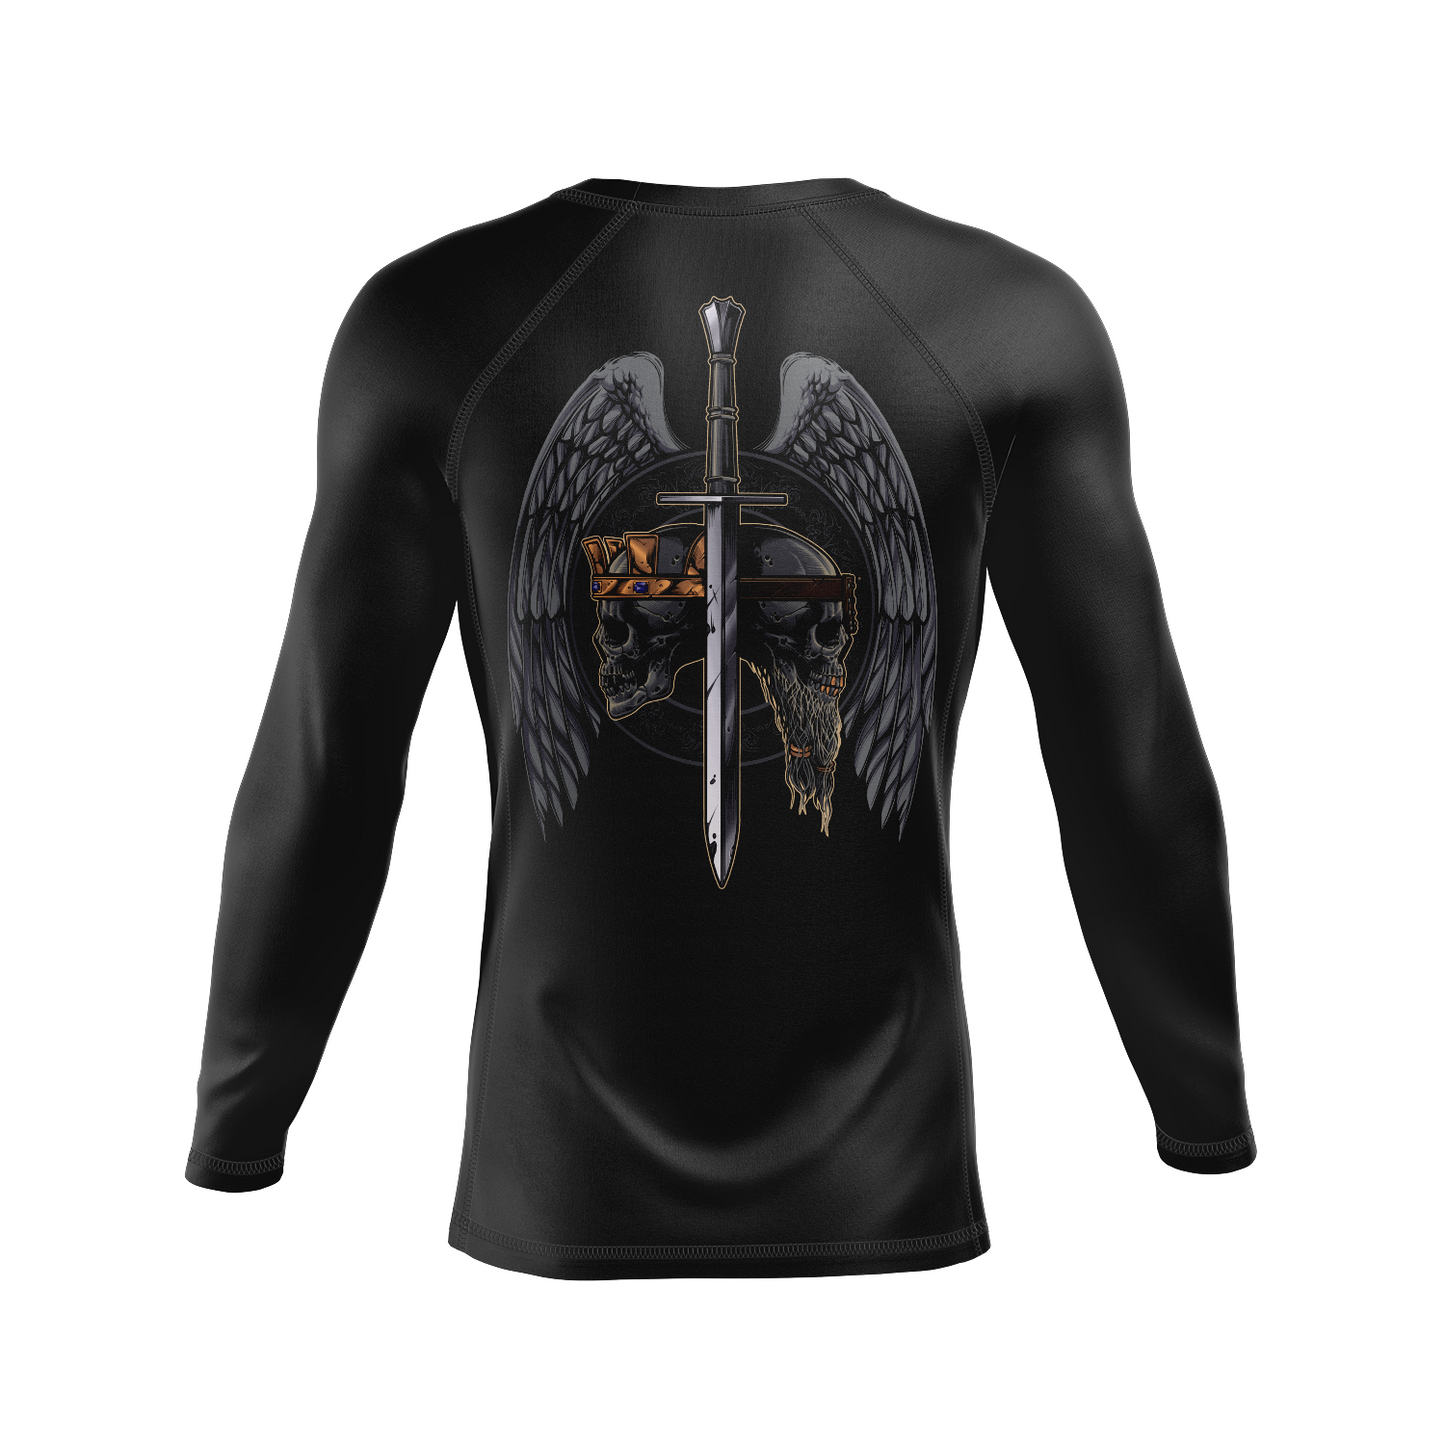 Deeds of Arms men's rash guard Kings and Commoners, black